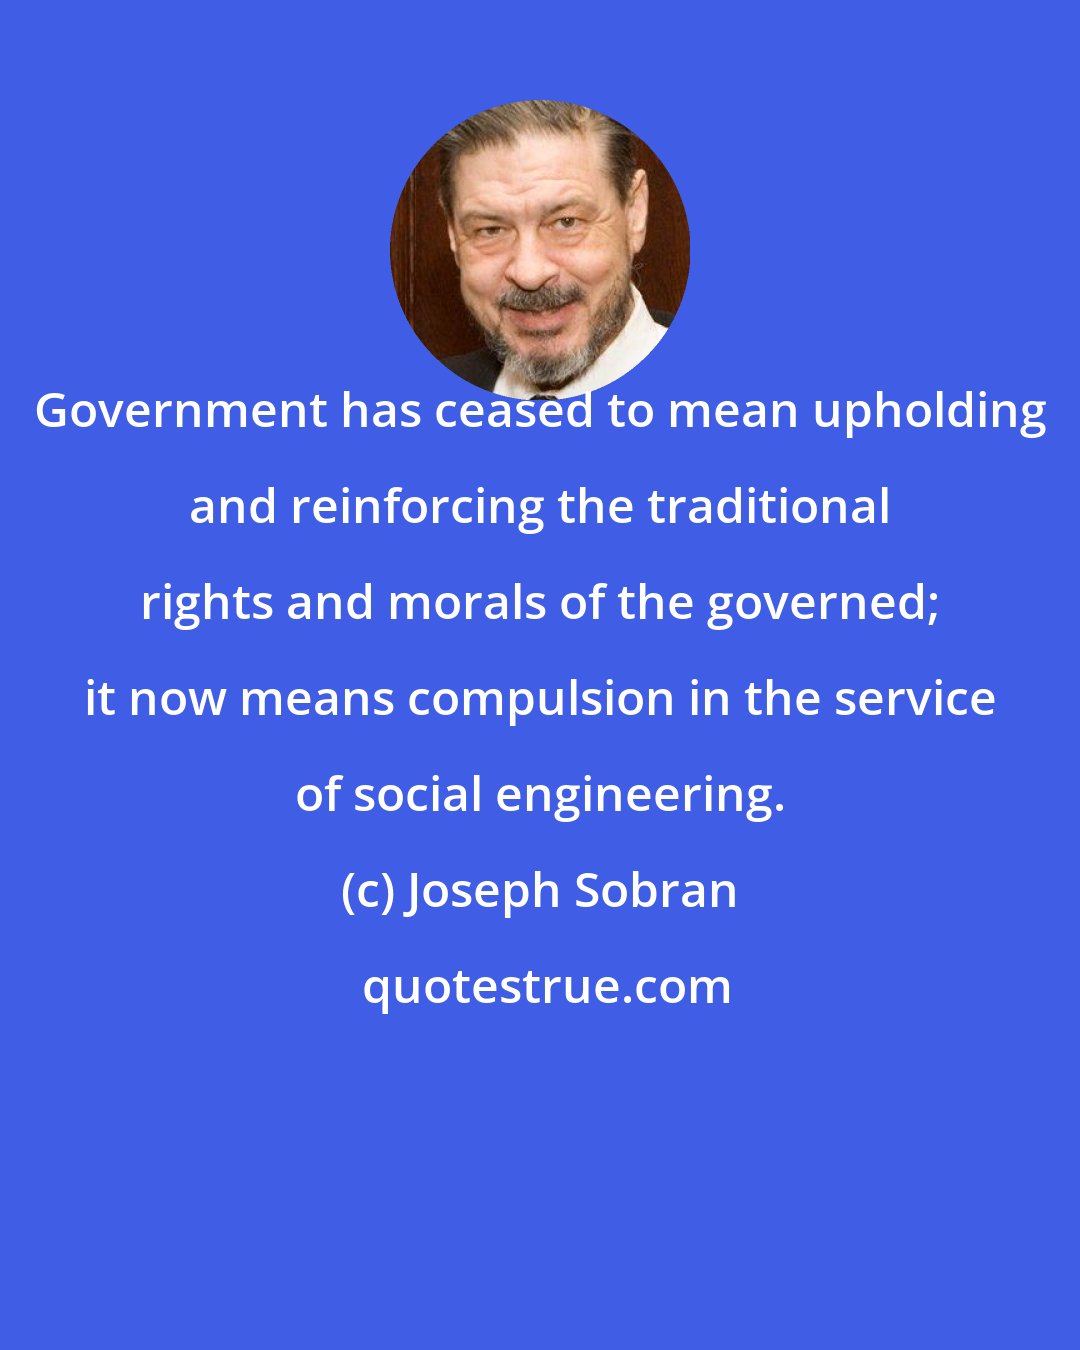 Joseph Sobran: Government has ceased to mean upholding and reinforcing the traditional rights and morals of the governed; it now means compulsion in the service of social engineering.